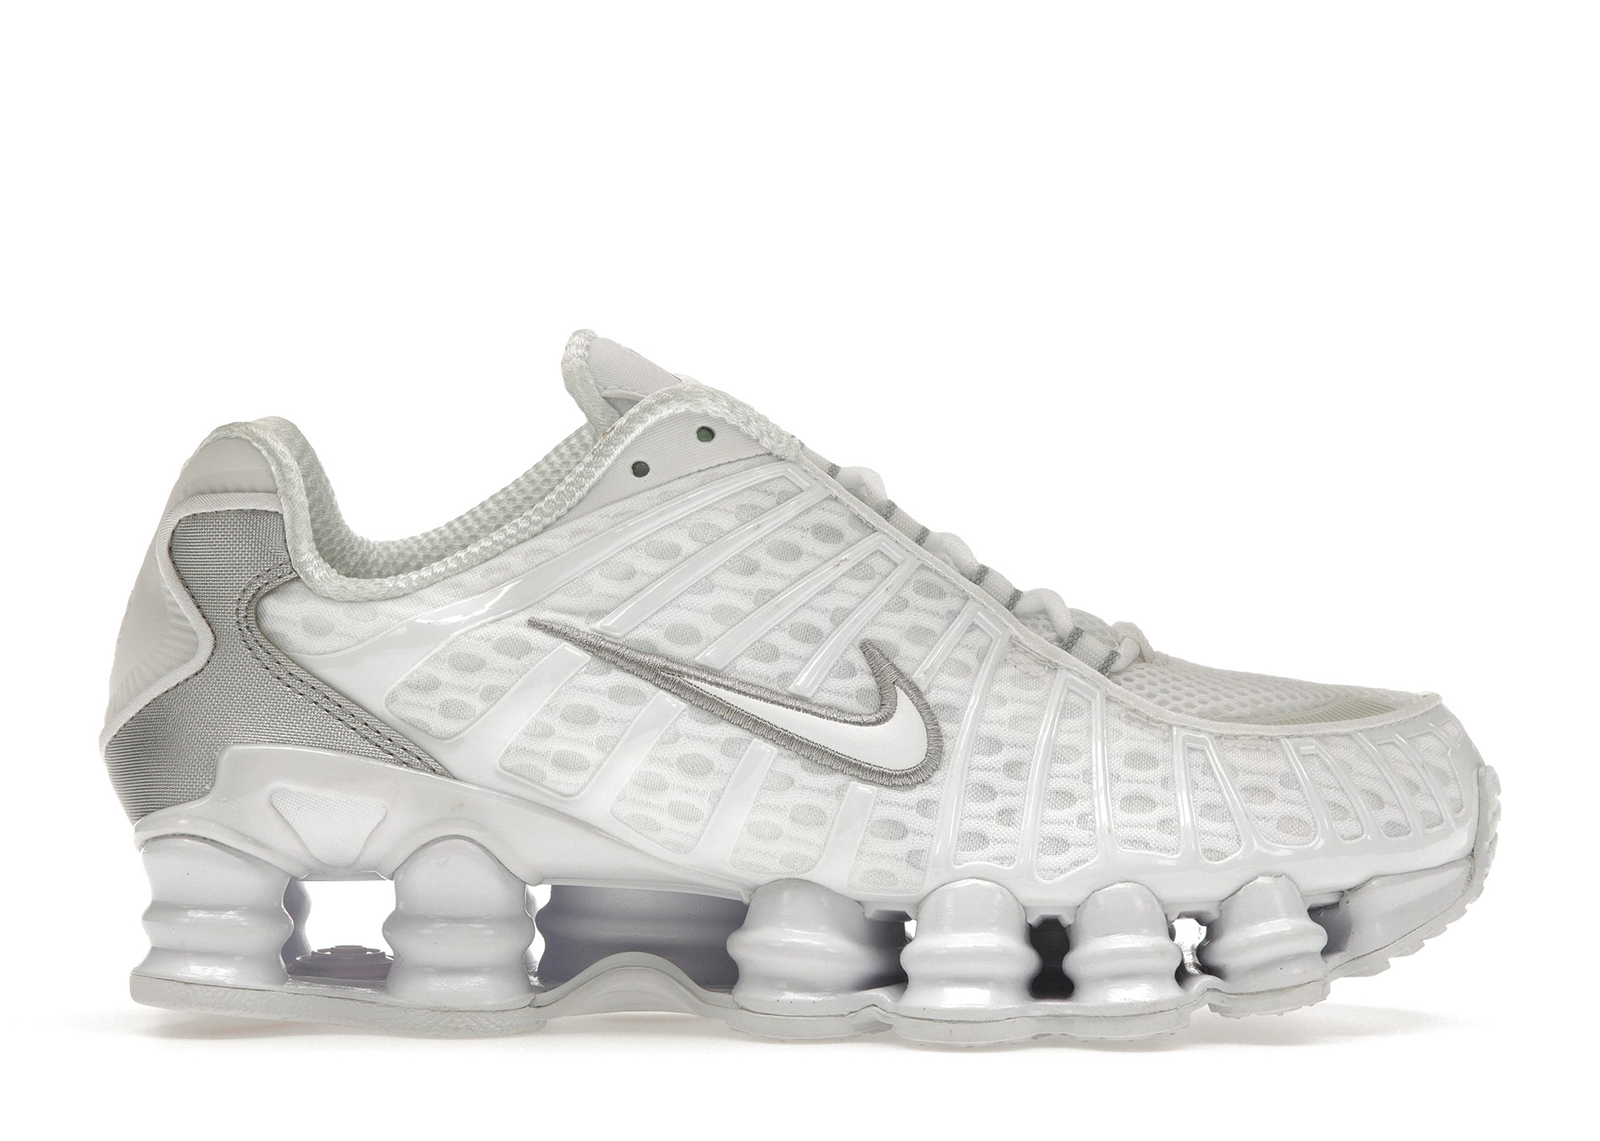 Buy Nike Shox Shoes & New Sneakers - StockX